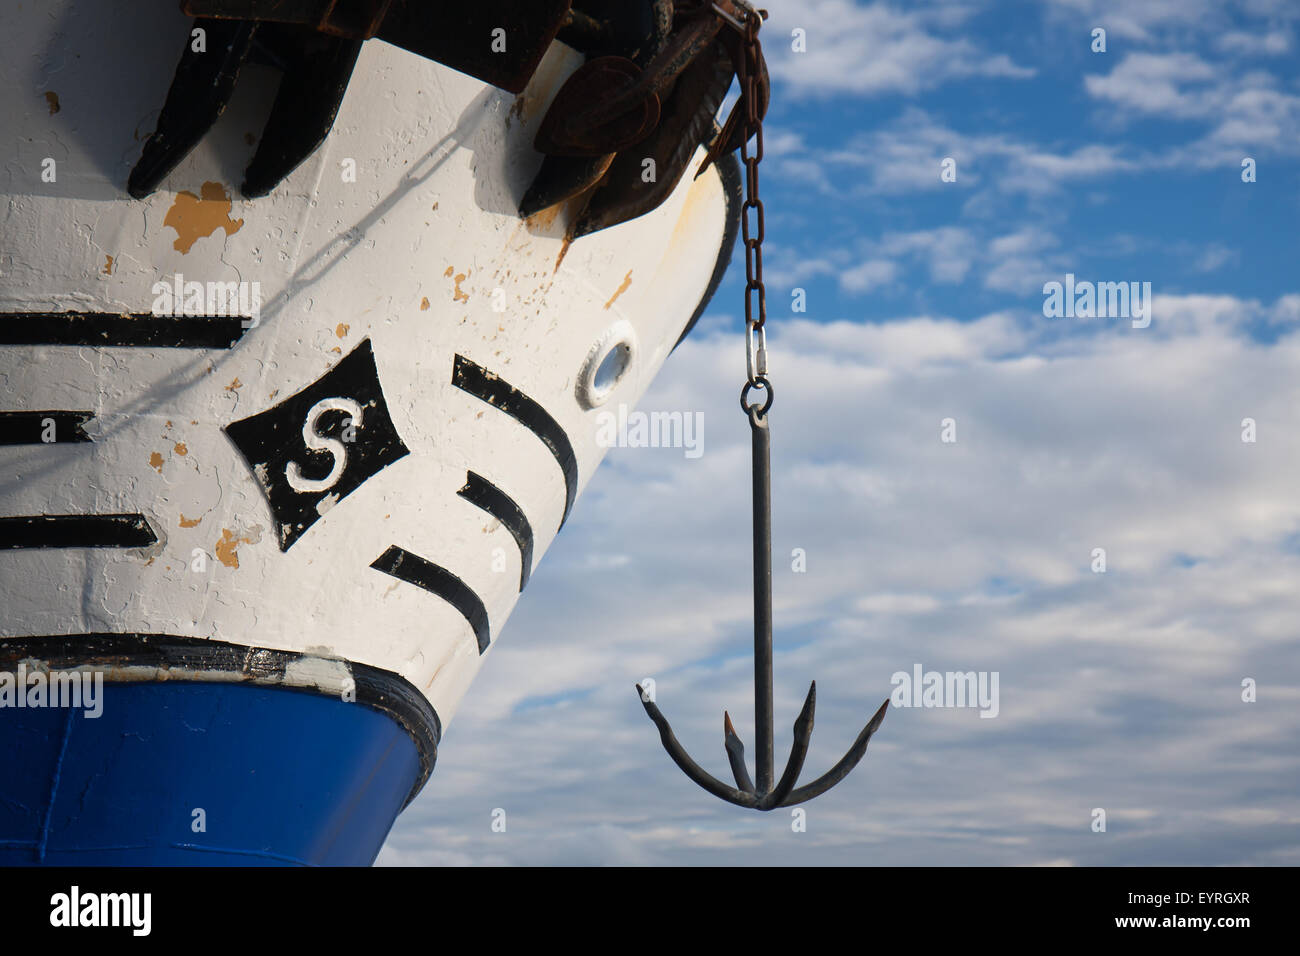 Bow of big ship with an anchor Stock Photo - Alamy